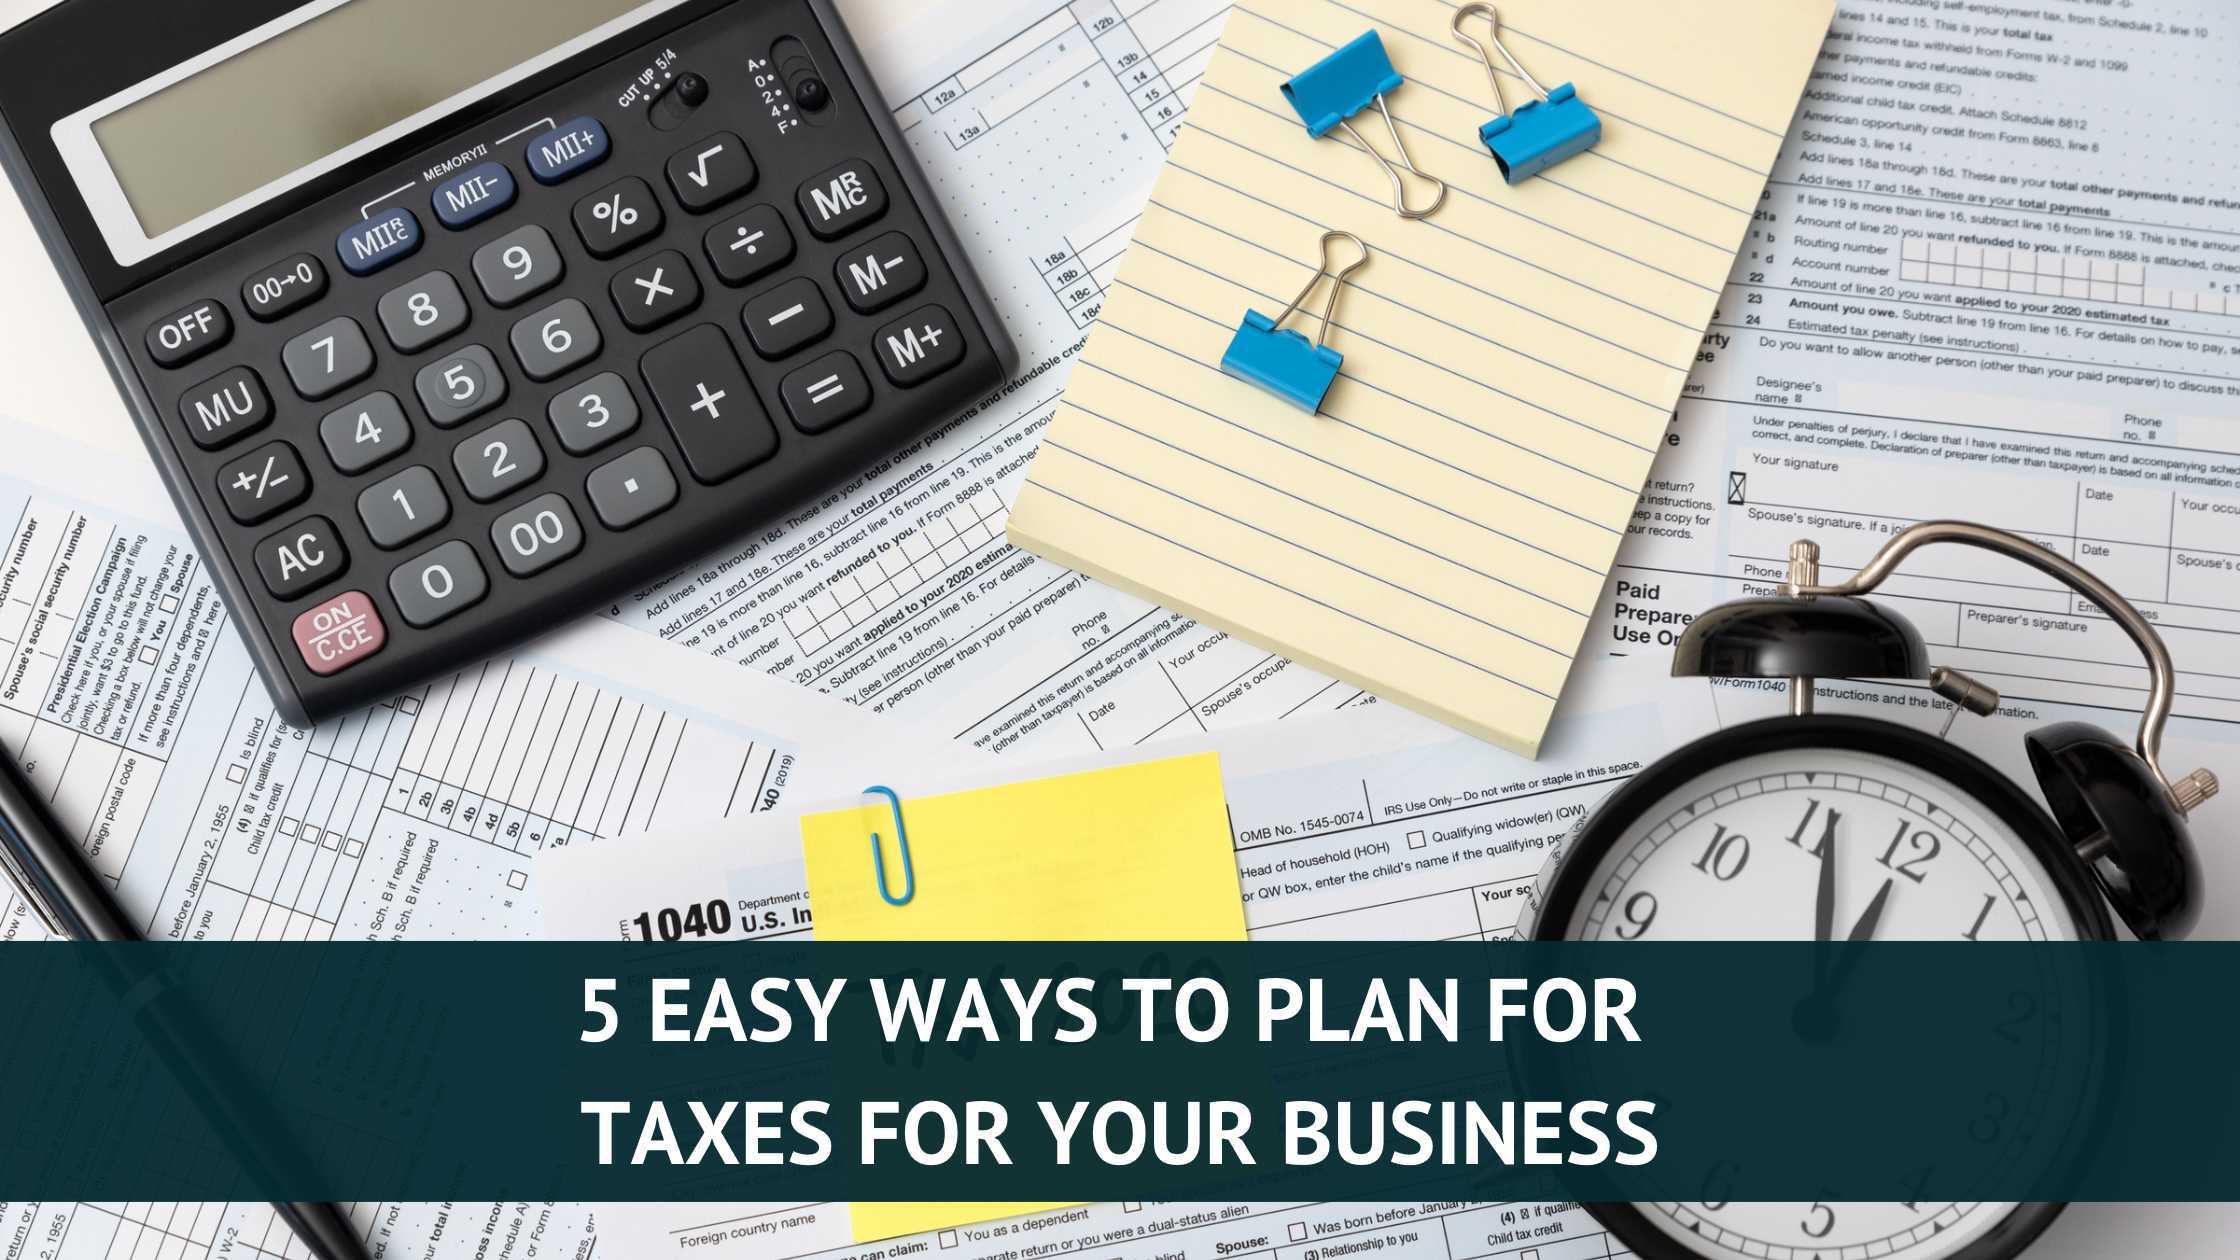 5 Easy Ways to Plan for Taxes for Your Business - Heather Ryan - Tax Queen